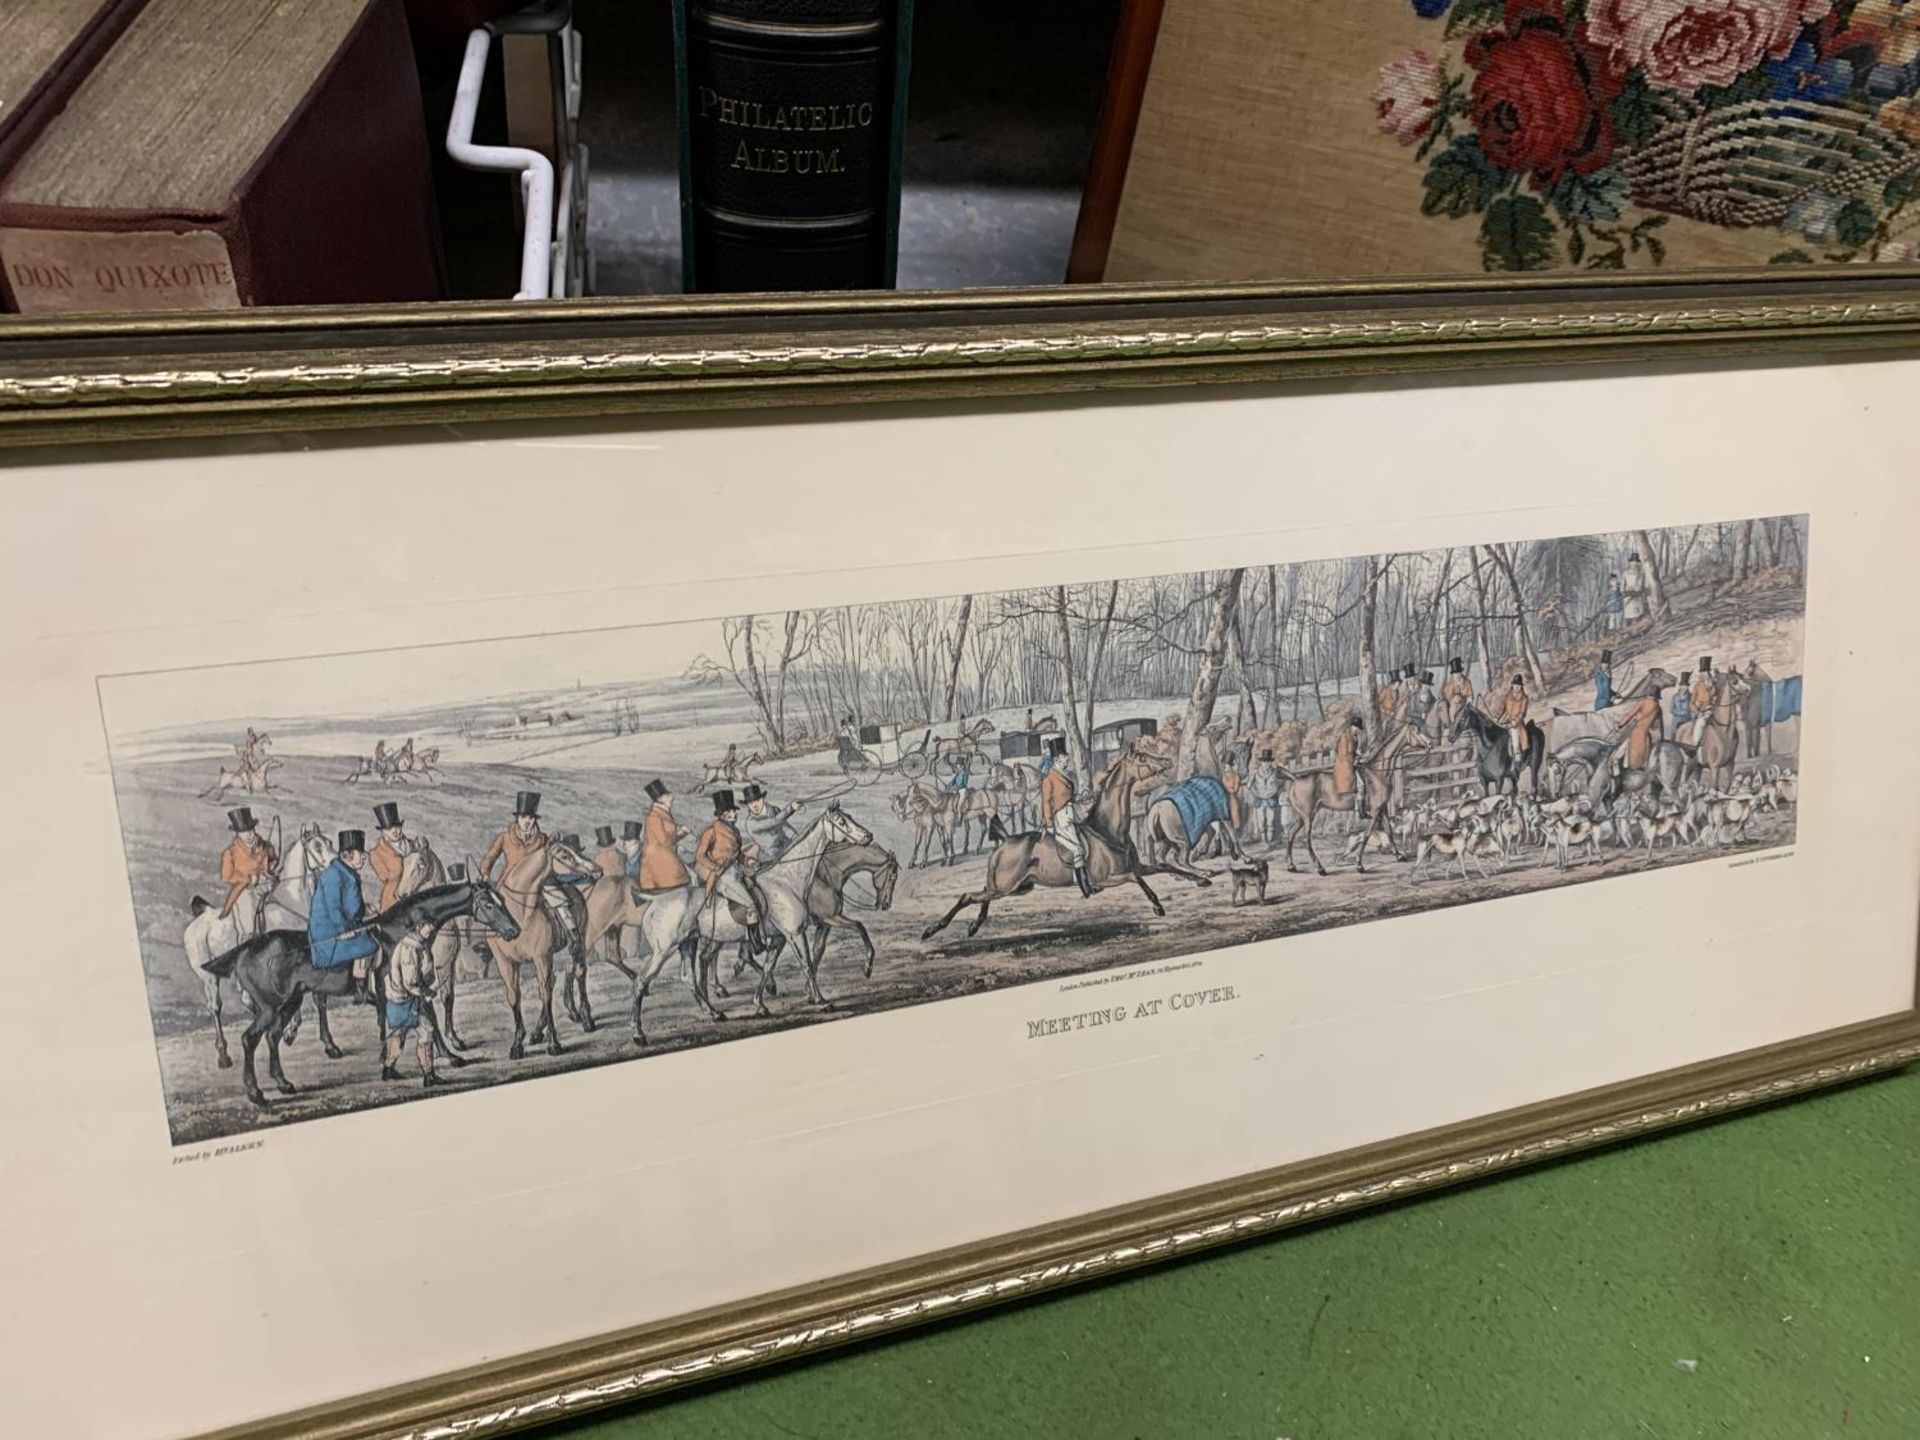 TWO FRAMED HUNTING PRINTS MEETING AT COVER AND FULL CRY - Image 3 of 3